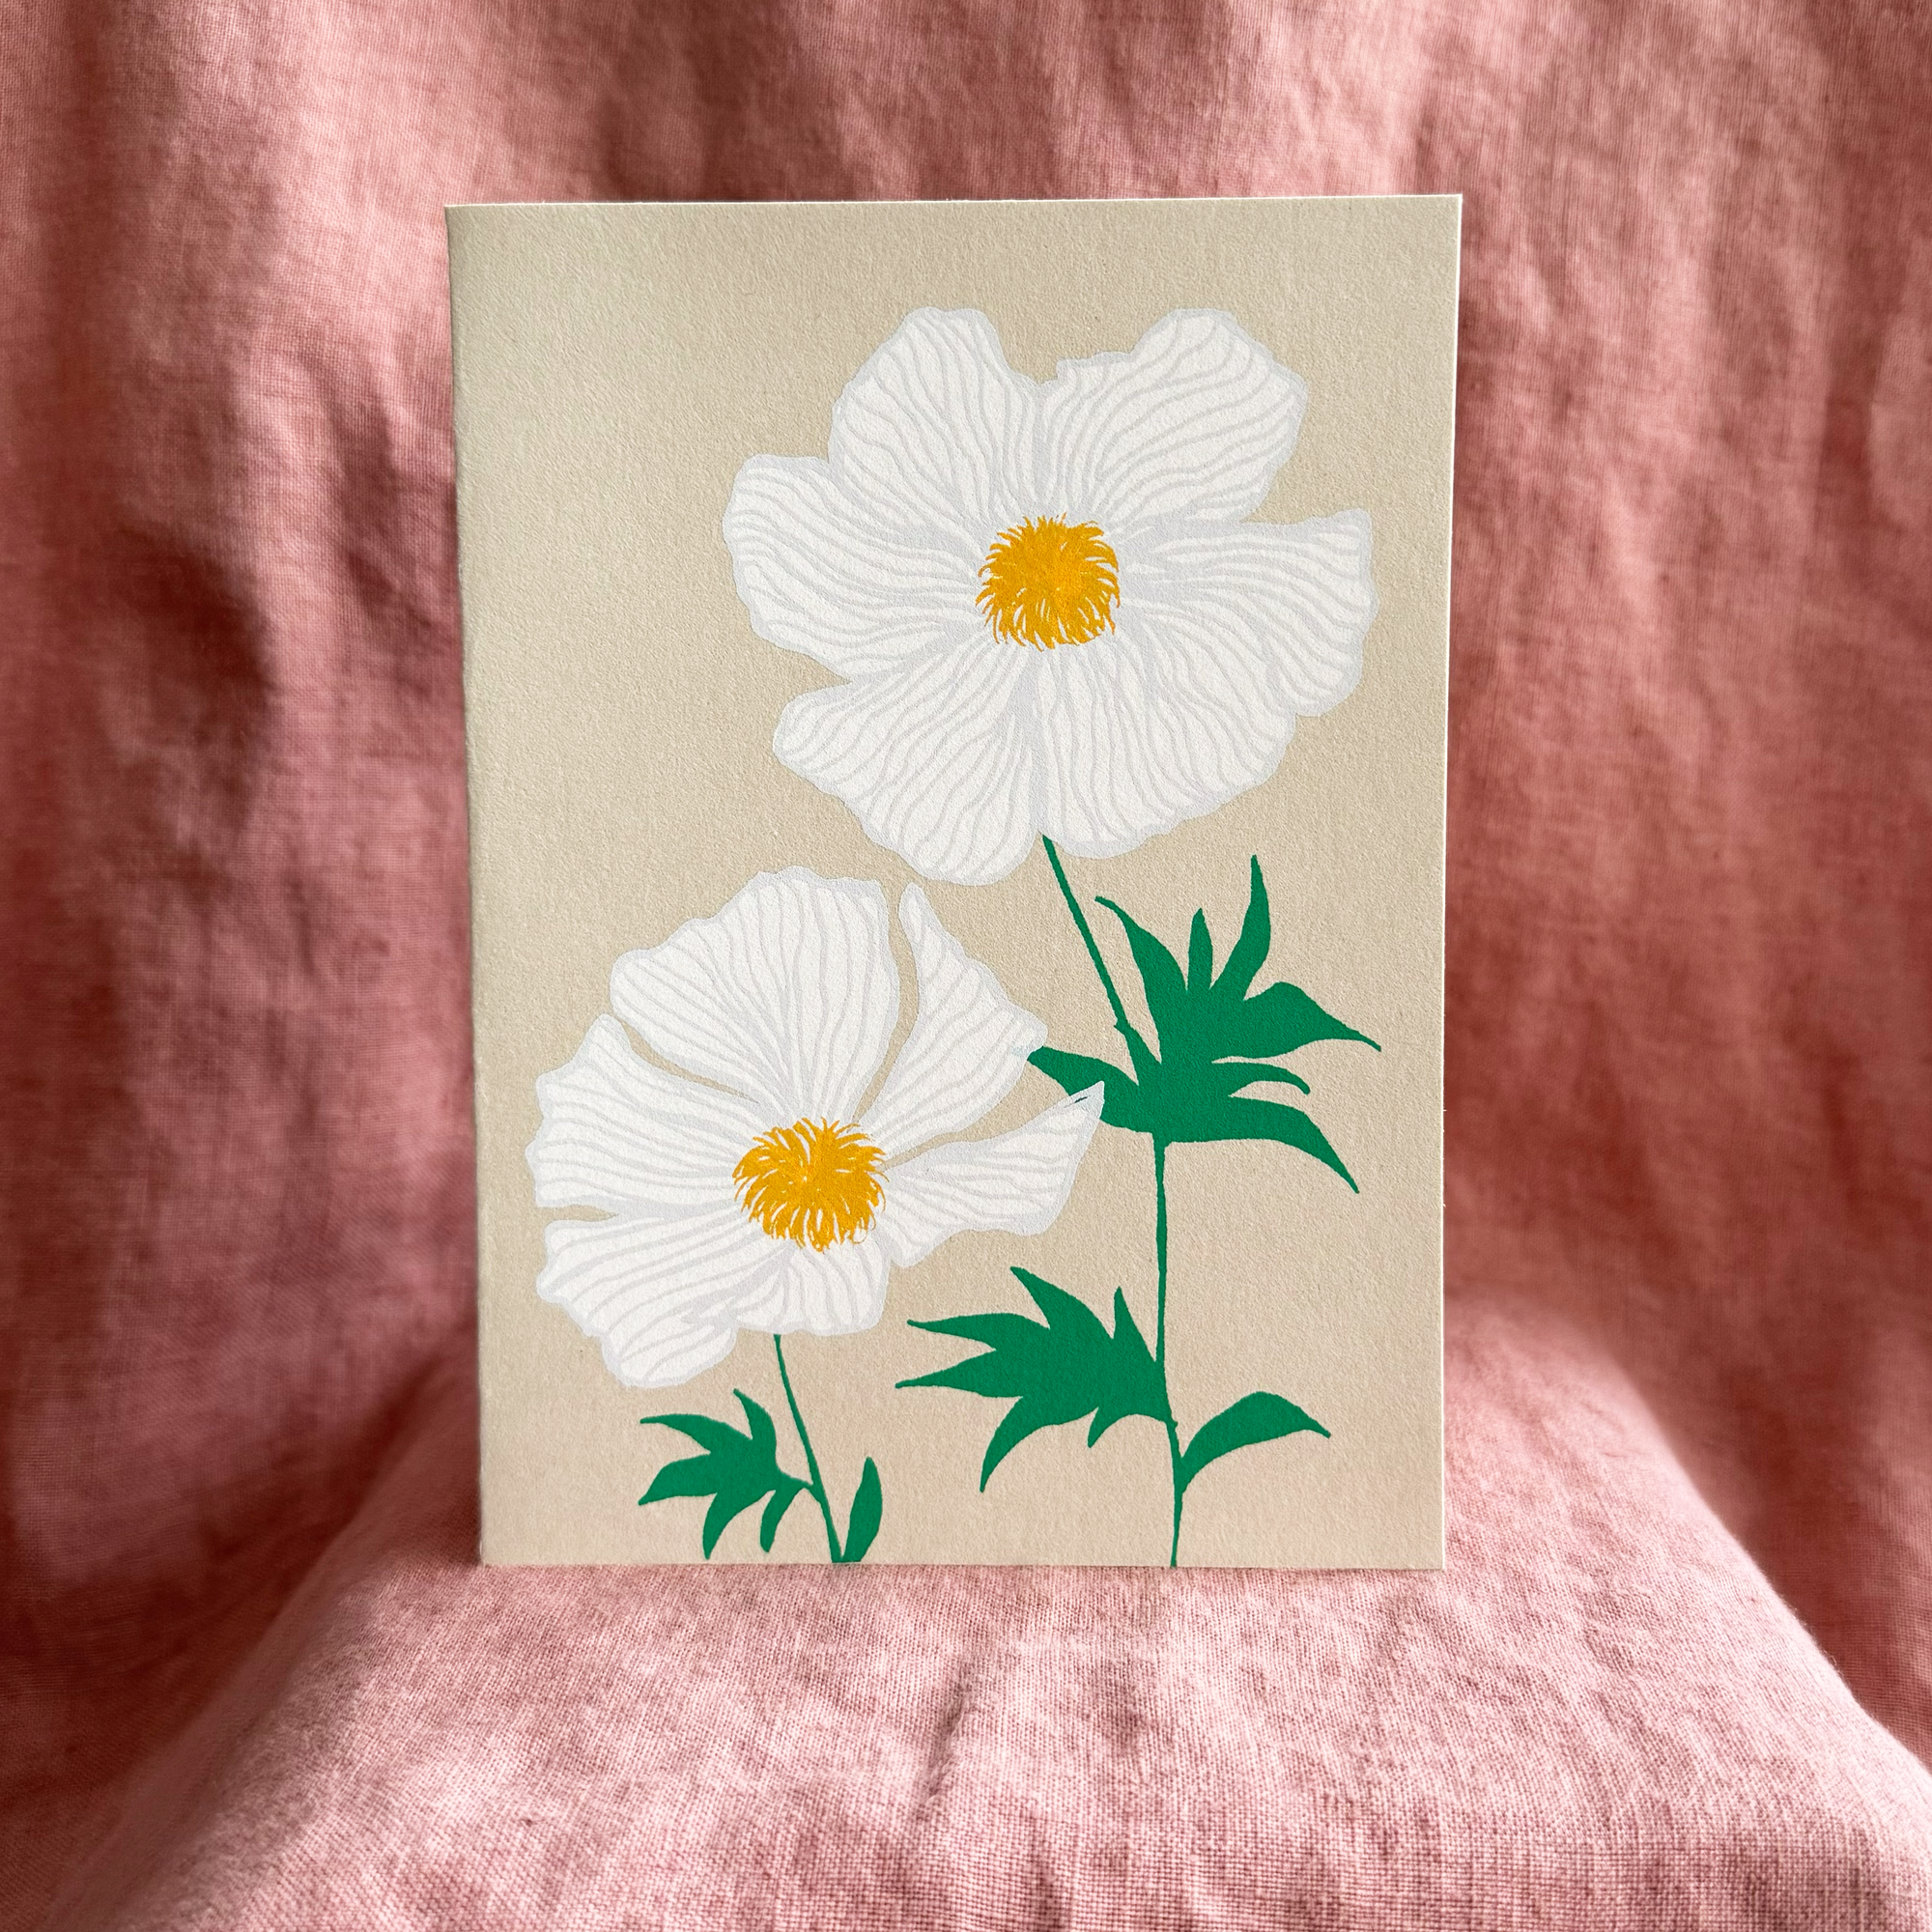 flower_card_nicely_done_cards